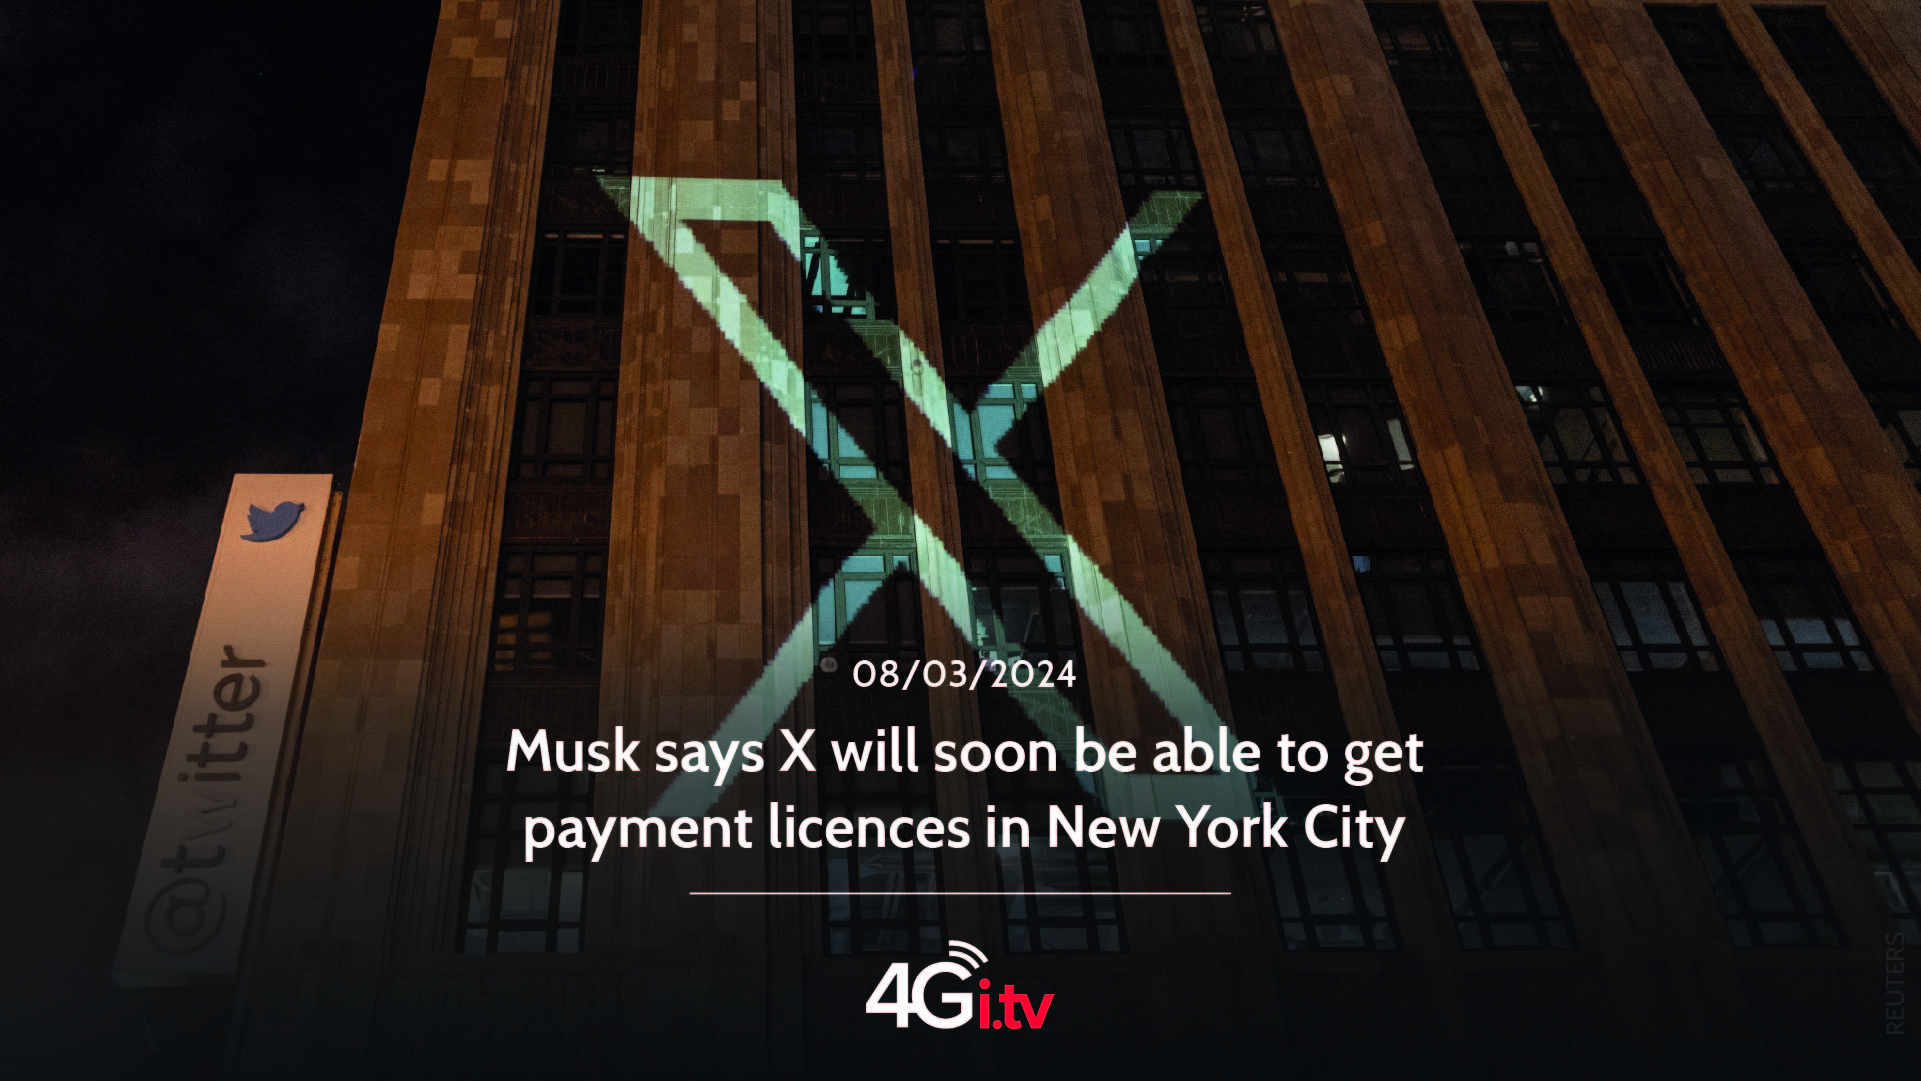 Подробнее о статье Musk says X will soon be able to get payment licences in New York City